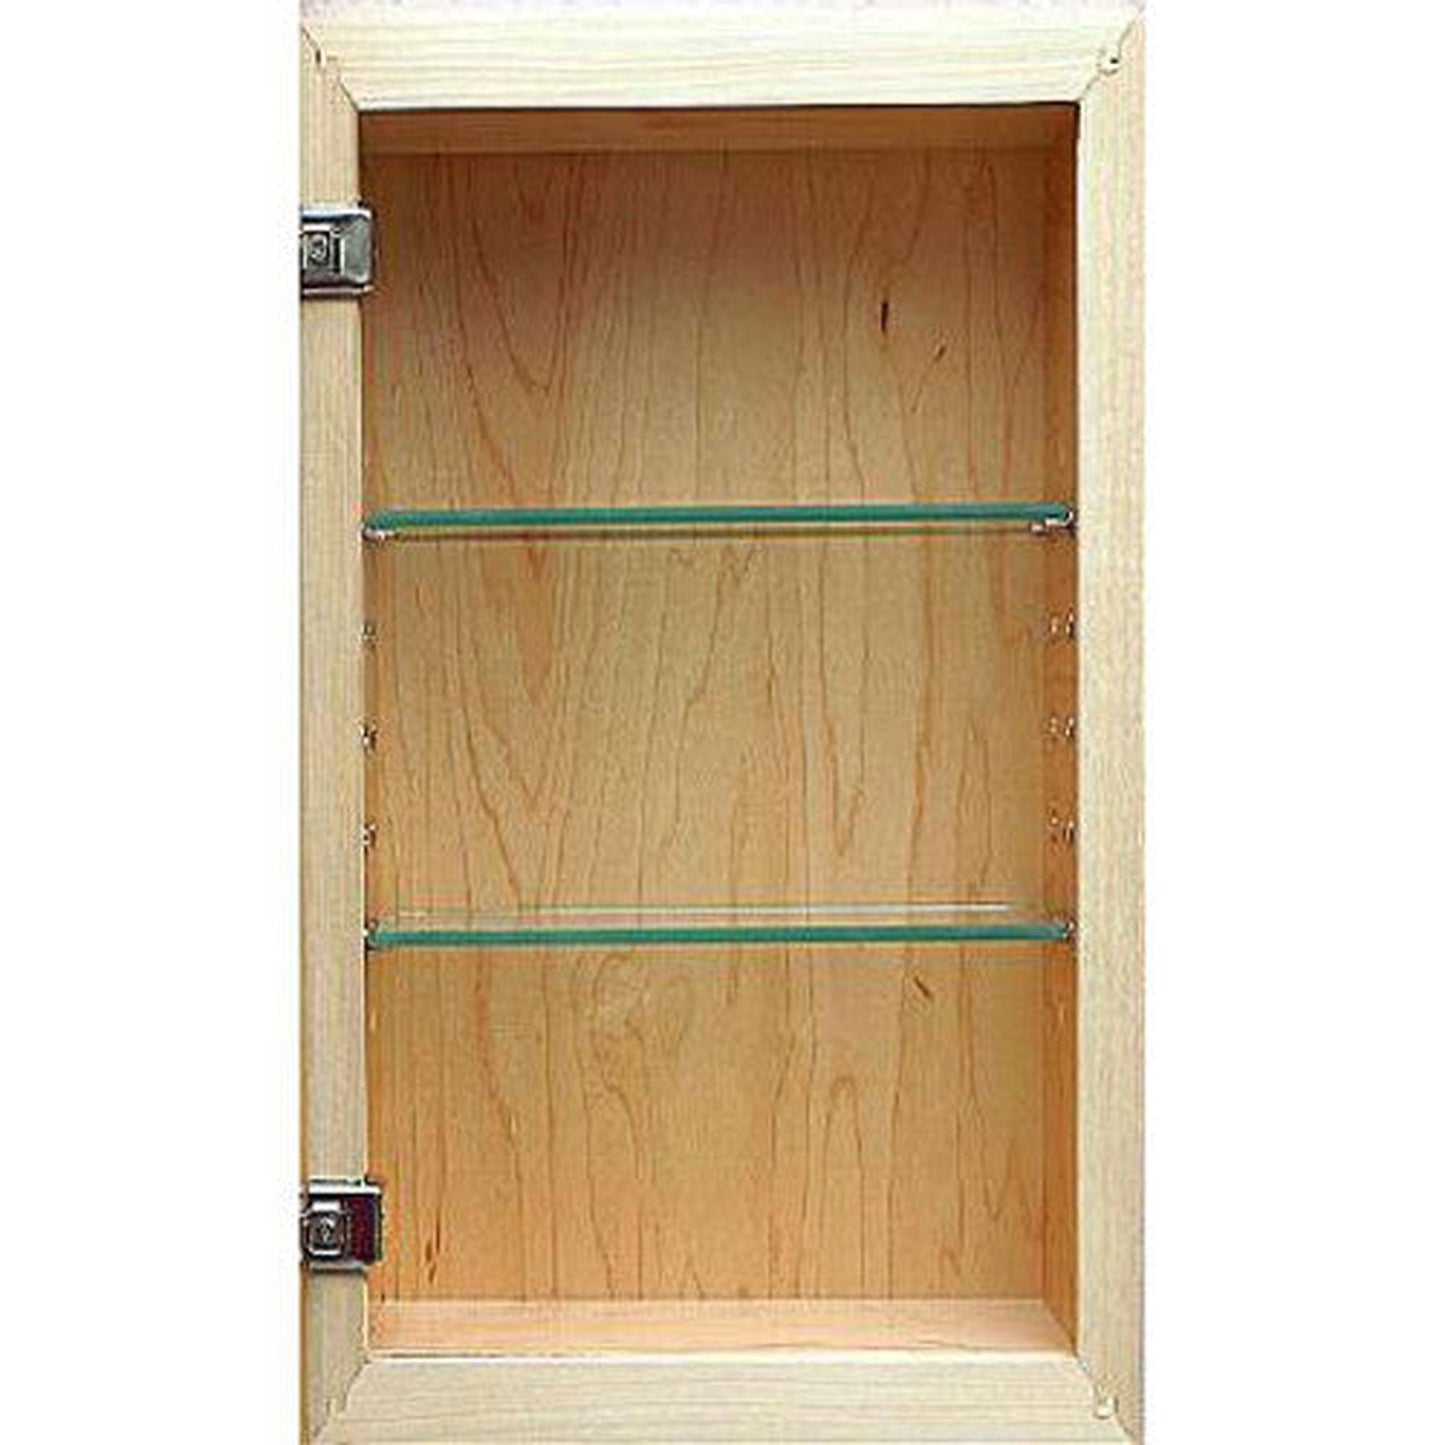 Fox Hollow Furnishings 14" x 24" Unfinished Shaker Style Natural Interior Standard 4" Depth Recessed Medicine Cabinet